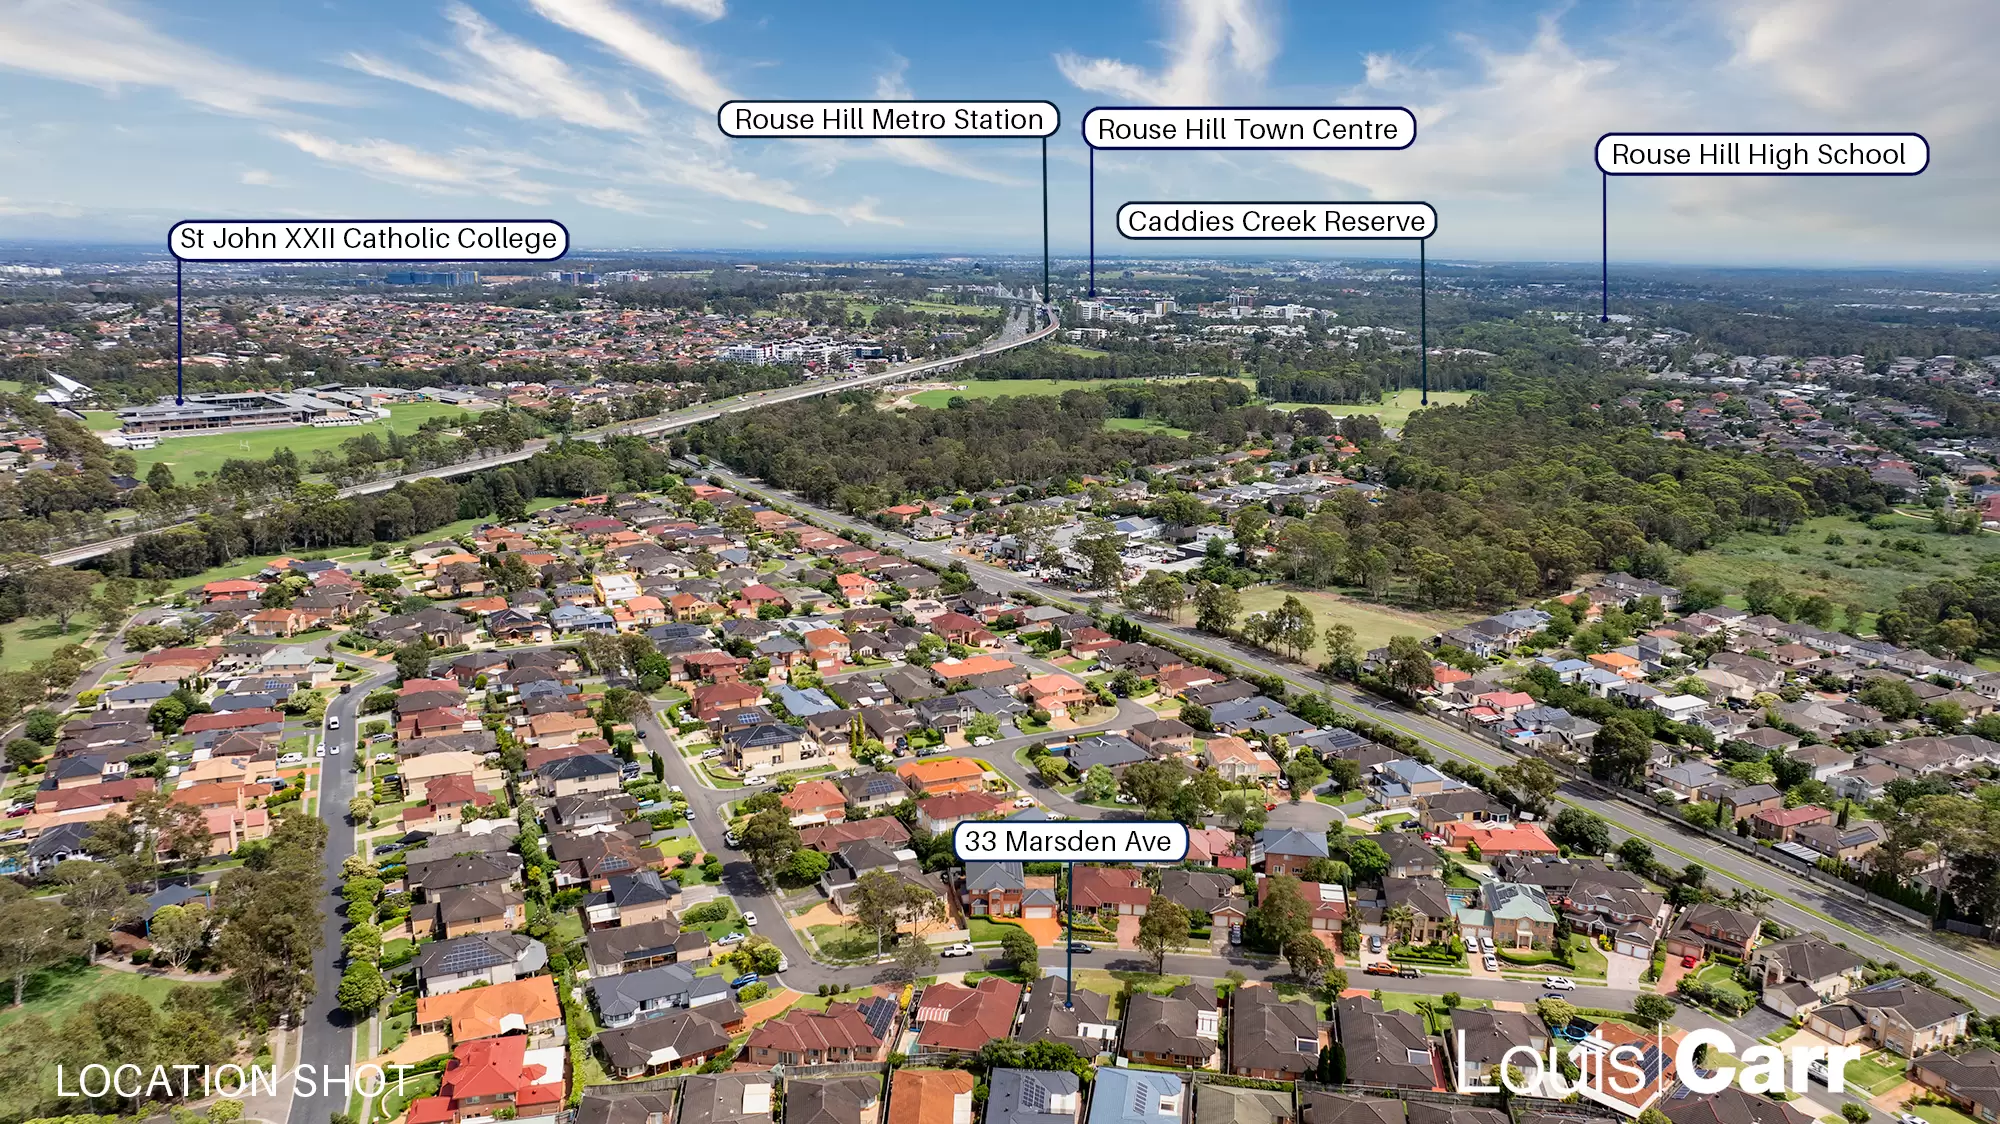 Photo #24: 33 Marsden Avenue, Kellyville - For Sale by Louis Carr Real Estate